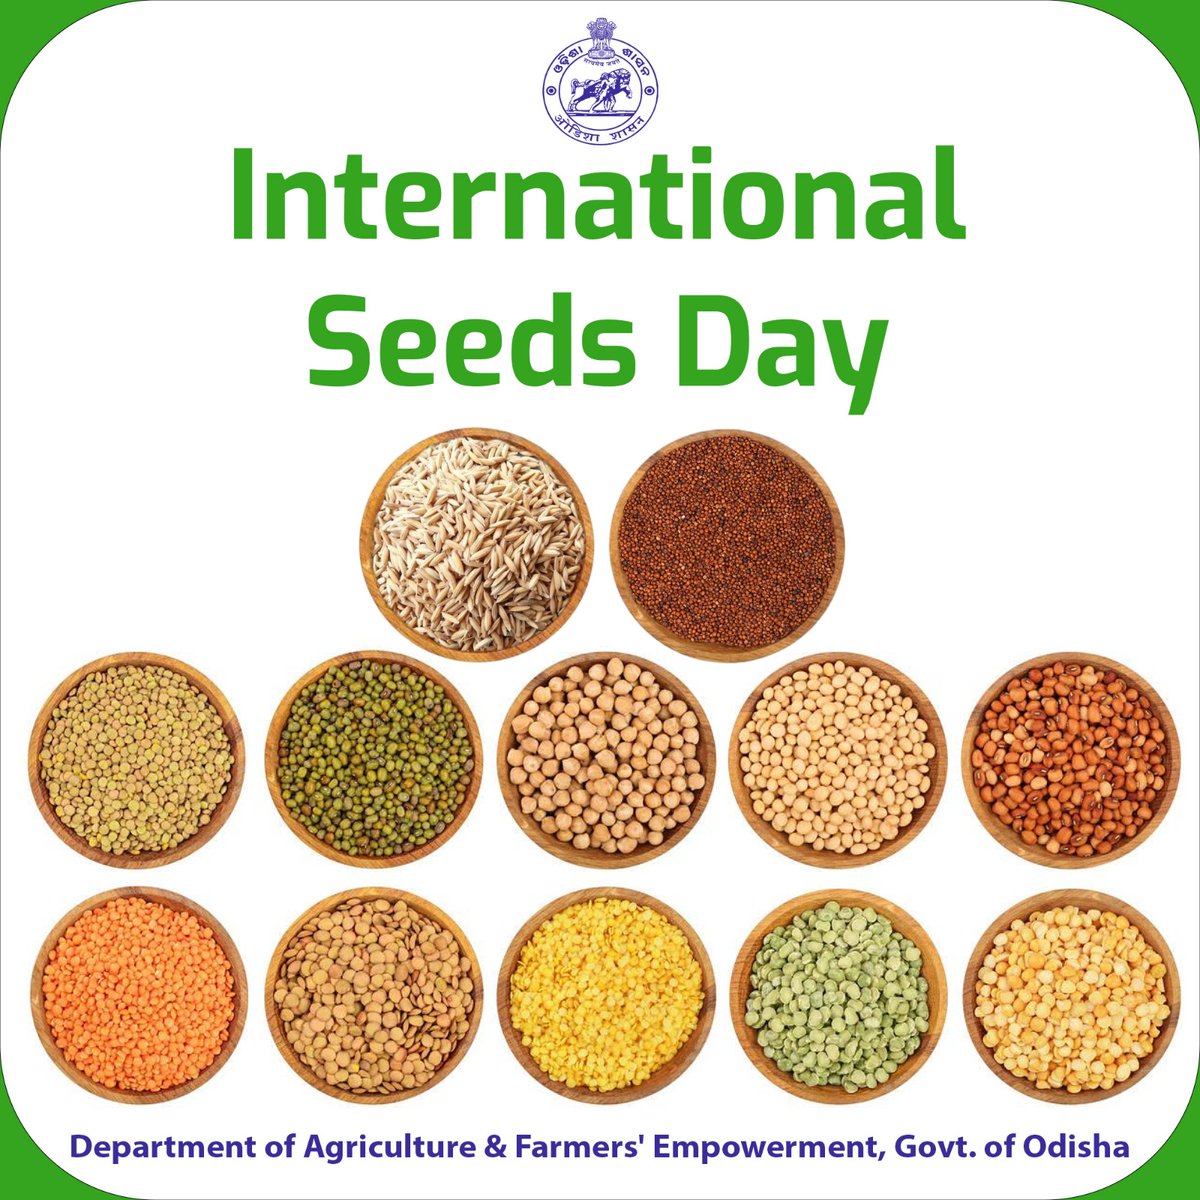 This #InternationalSeedsDay, let's celebrate agriculture's powerhouse. Let's commit to sowing organic and indigenous seeds for self-reliance and livelihoods.